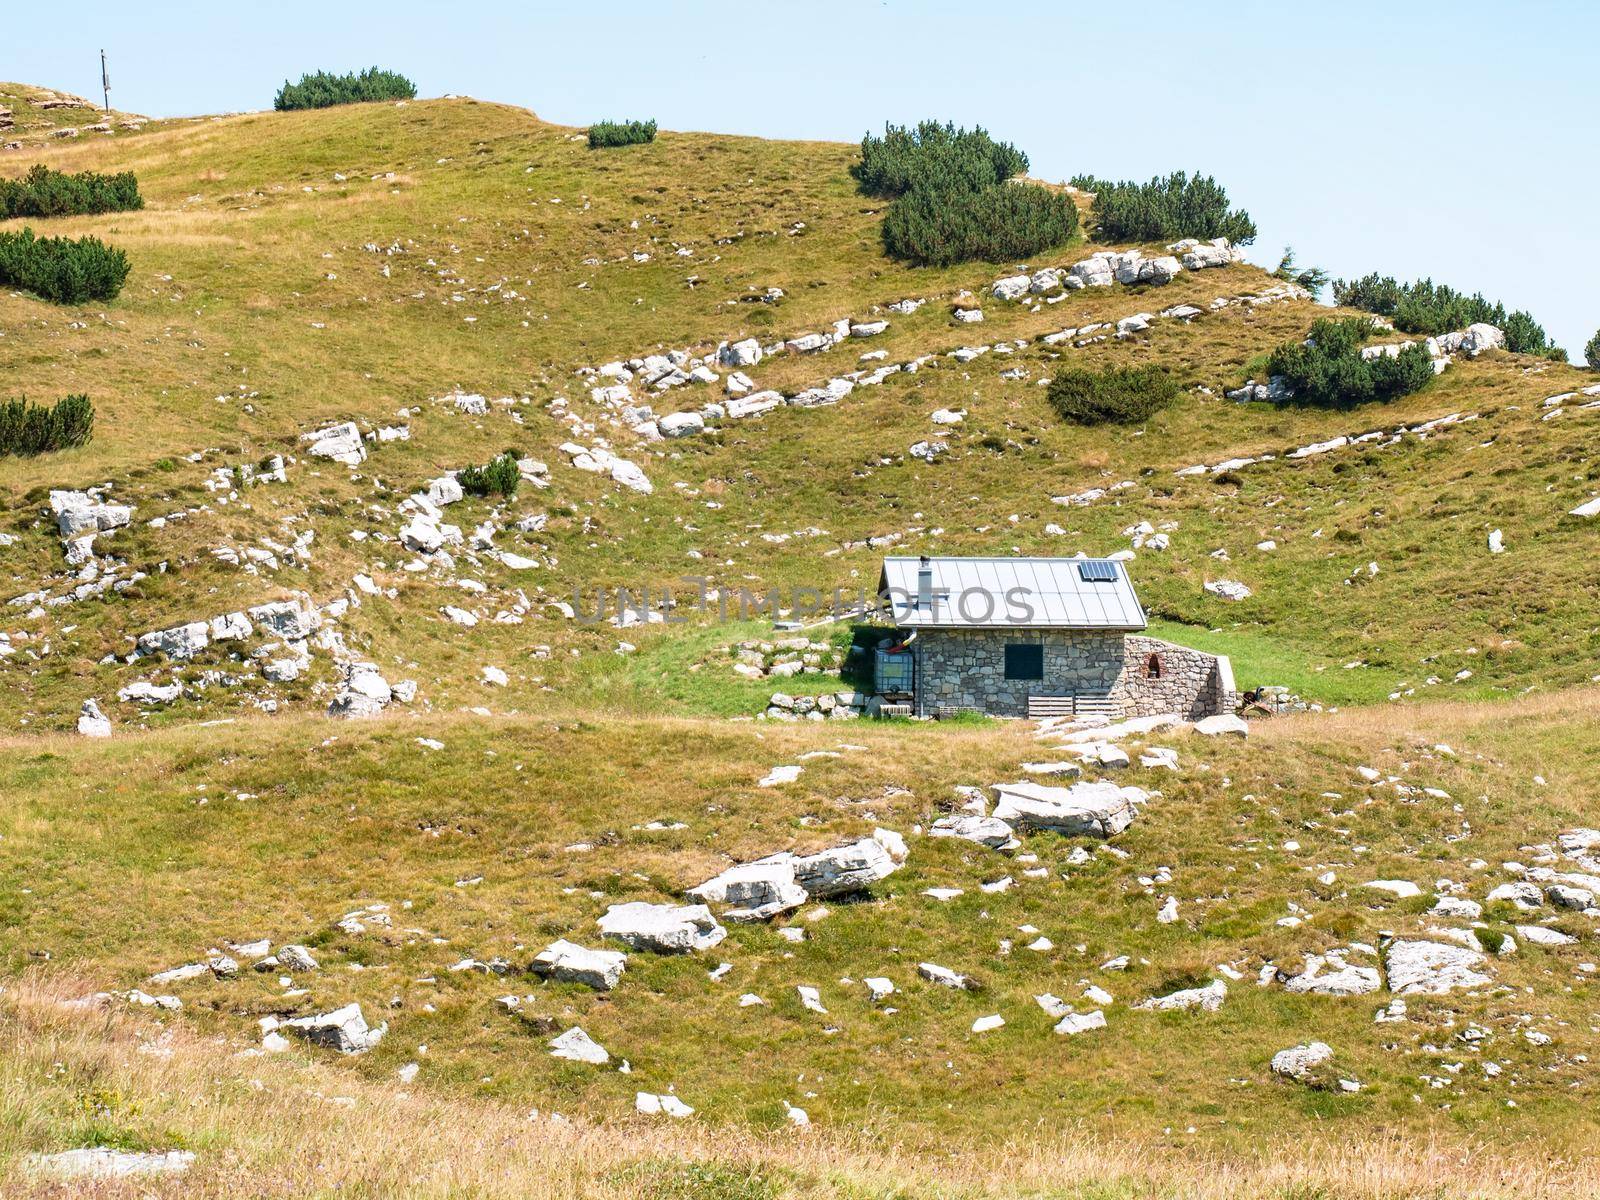 Stony holiday cottage hidden in meadow close to peak of Canfedin mountain by rdonar2